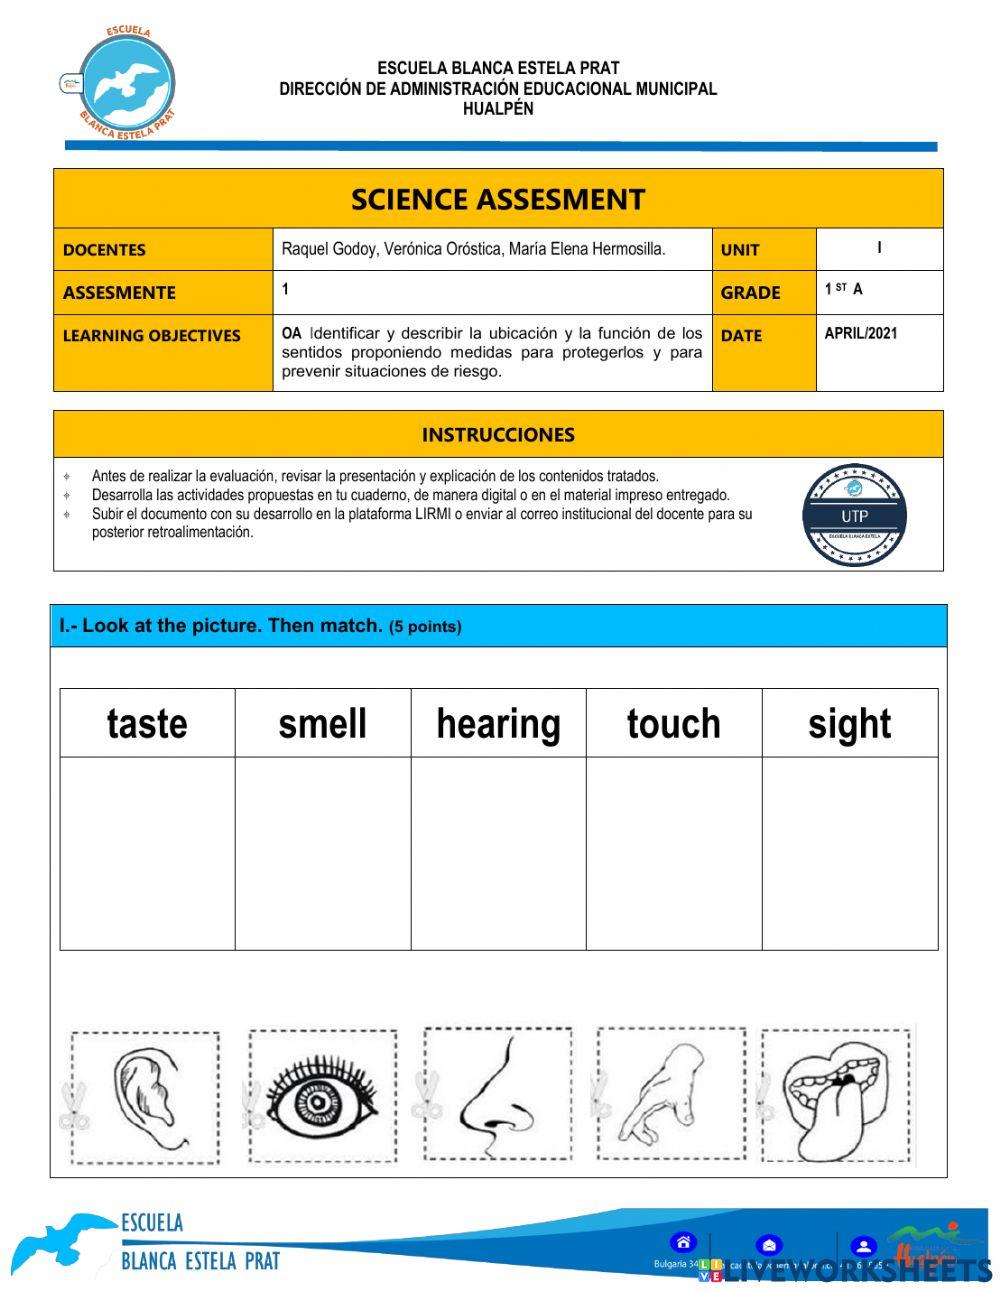 Science assessment